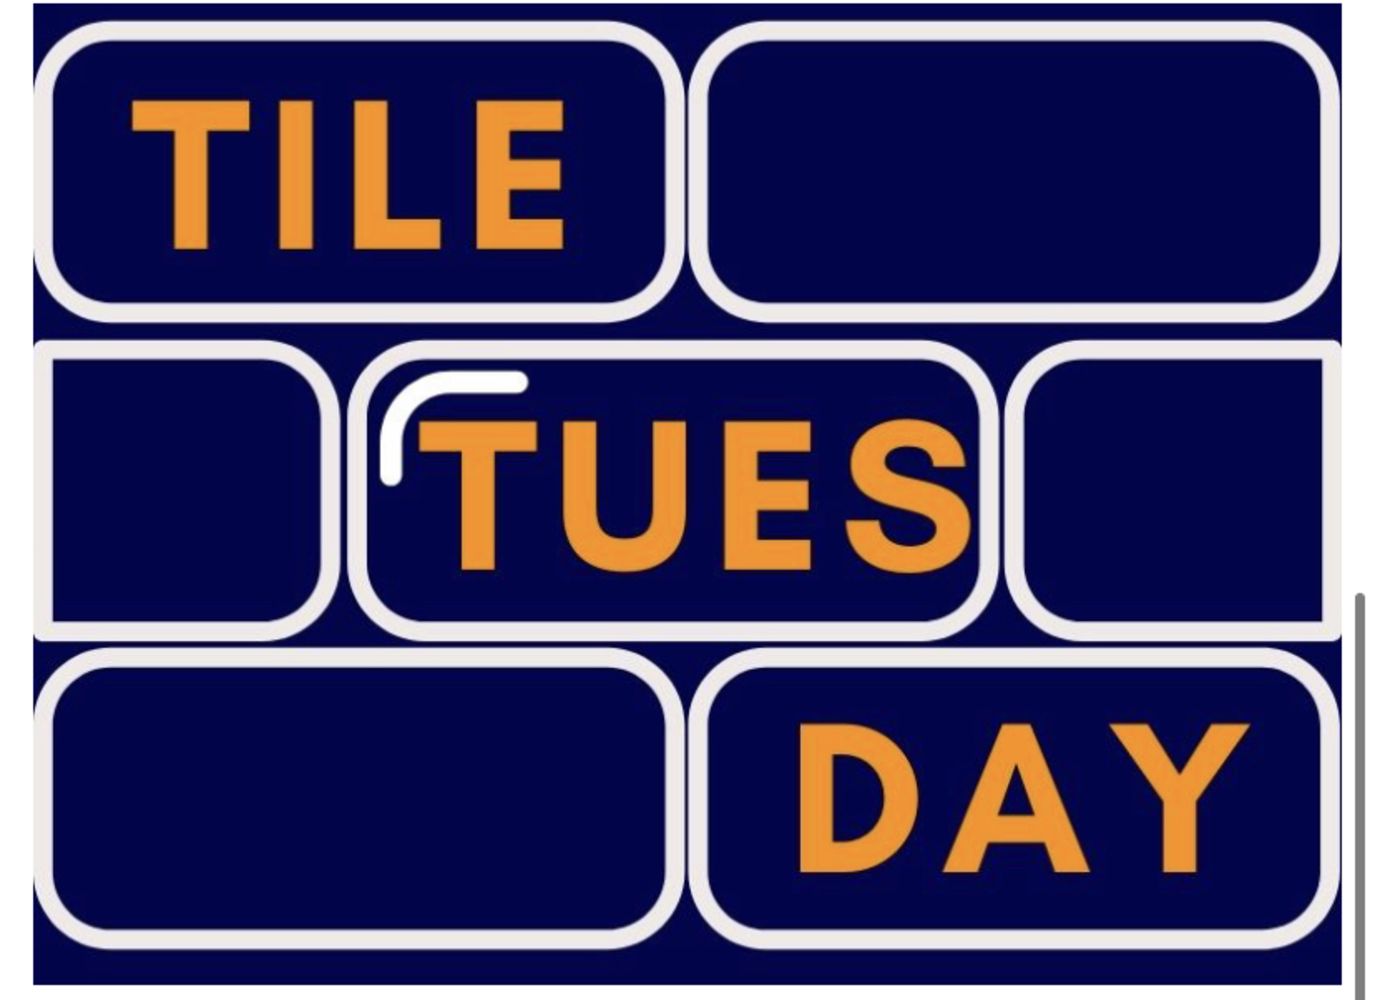 No Reserve - Tile Tuesday - “over £80k worth of tiles – Sourced from Johnsons Tiles” - 1st June 2021